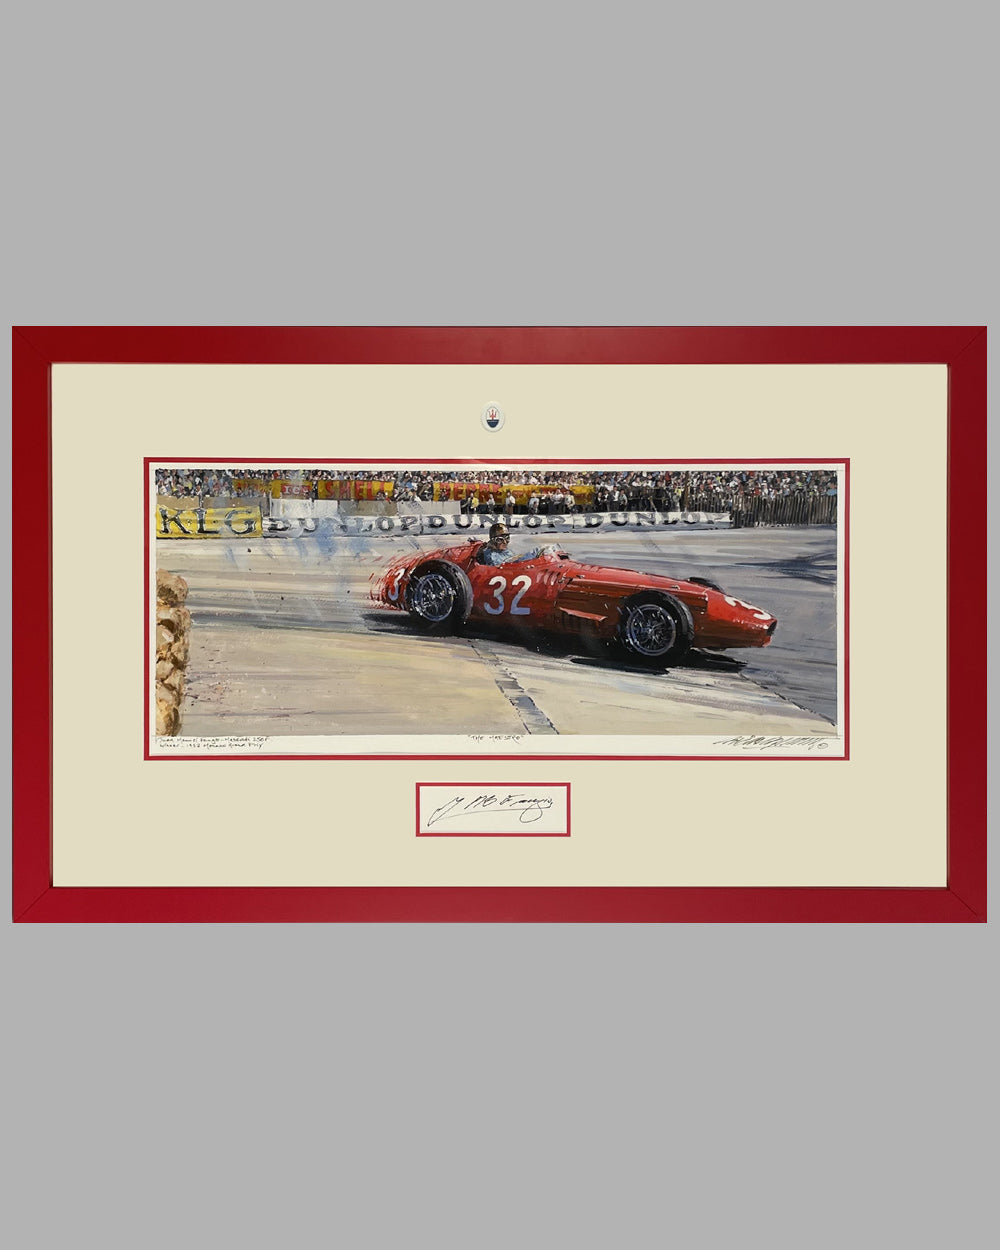 The Maestro painting by Nicholas Watts, autographed by Fangio